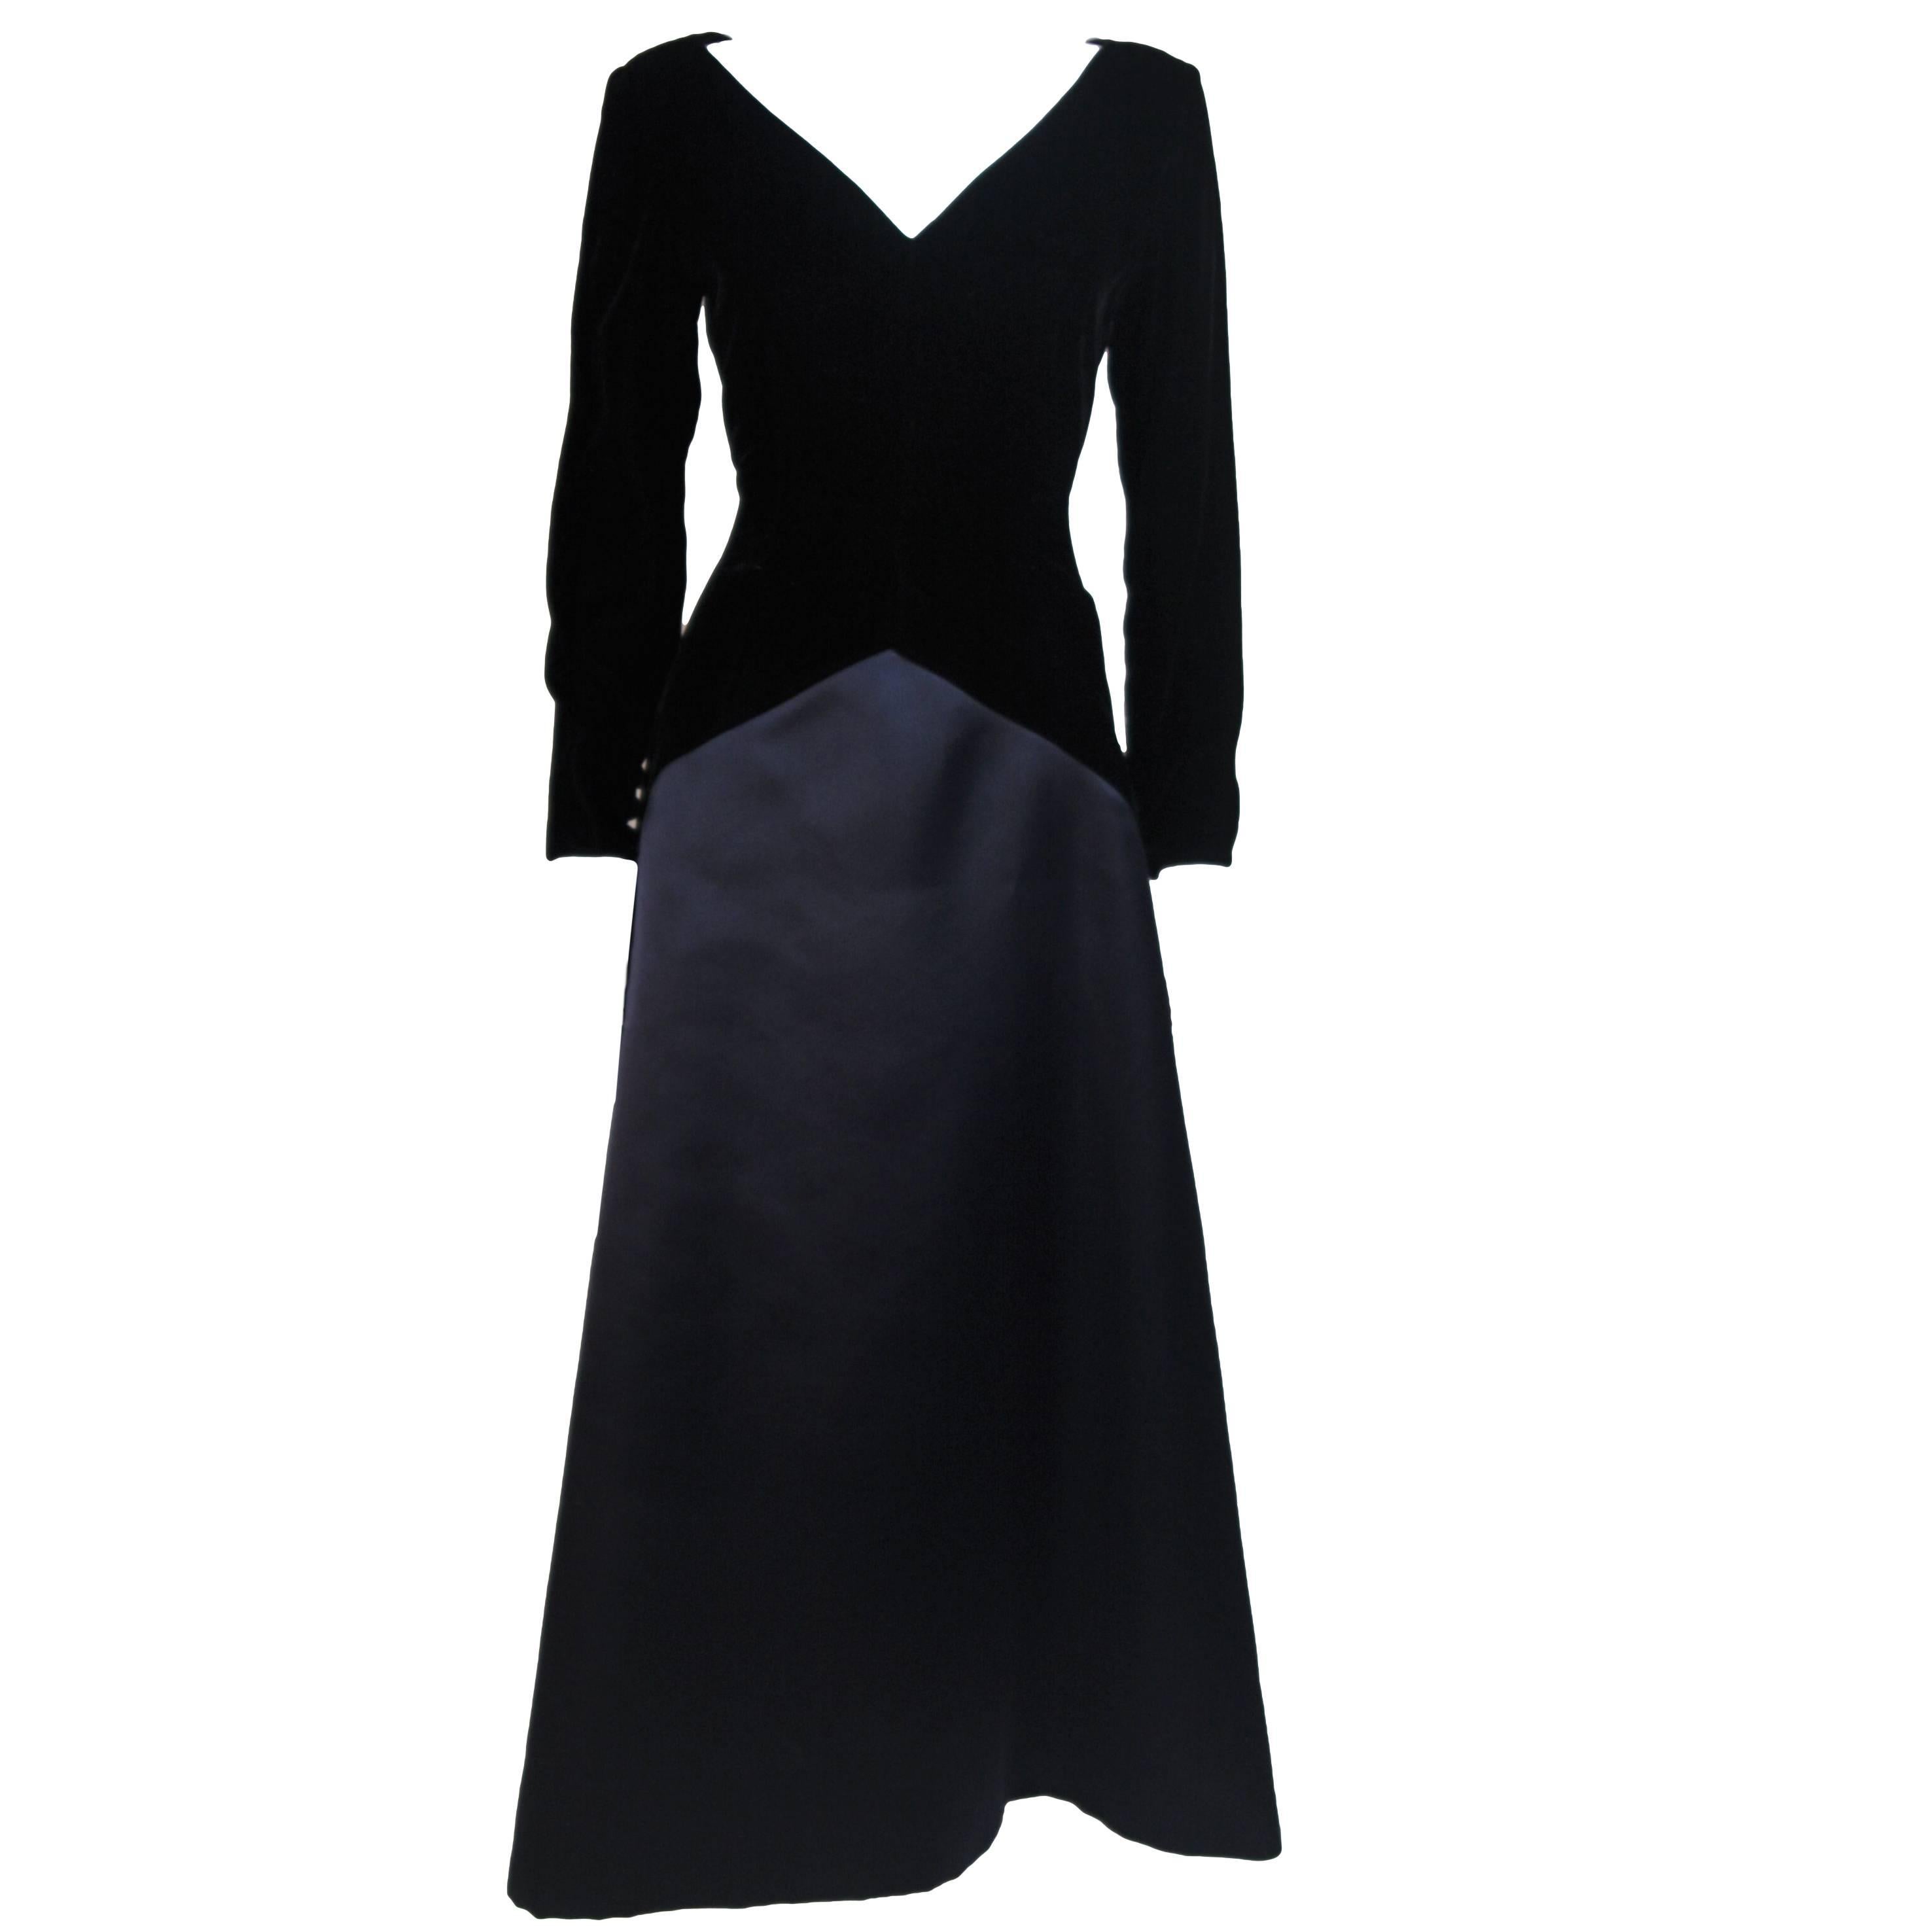 BILL BLASS Circa 1980's-1990's Velvet and Navy Satin Contrast Gown Size 12 For Sale